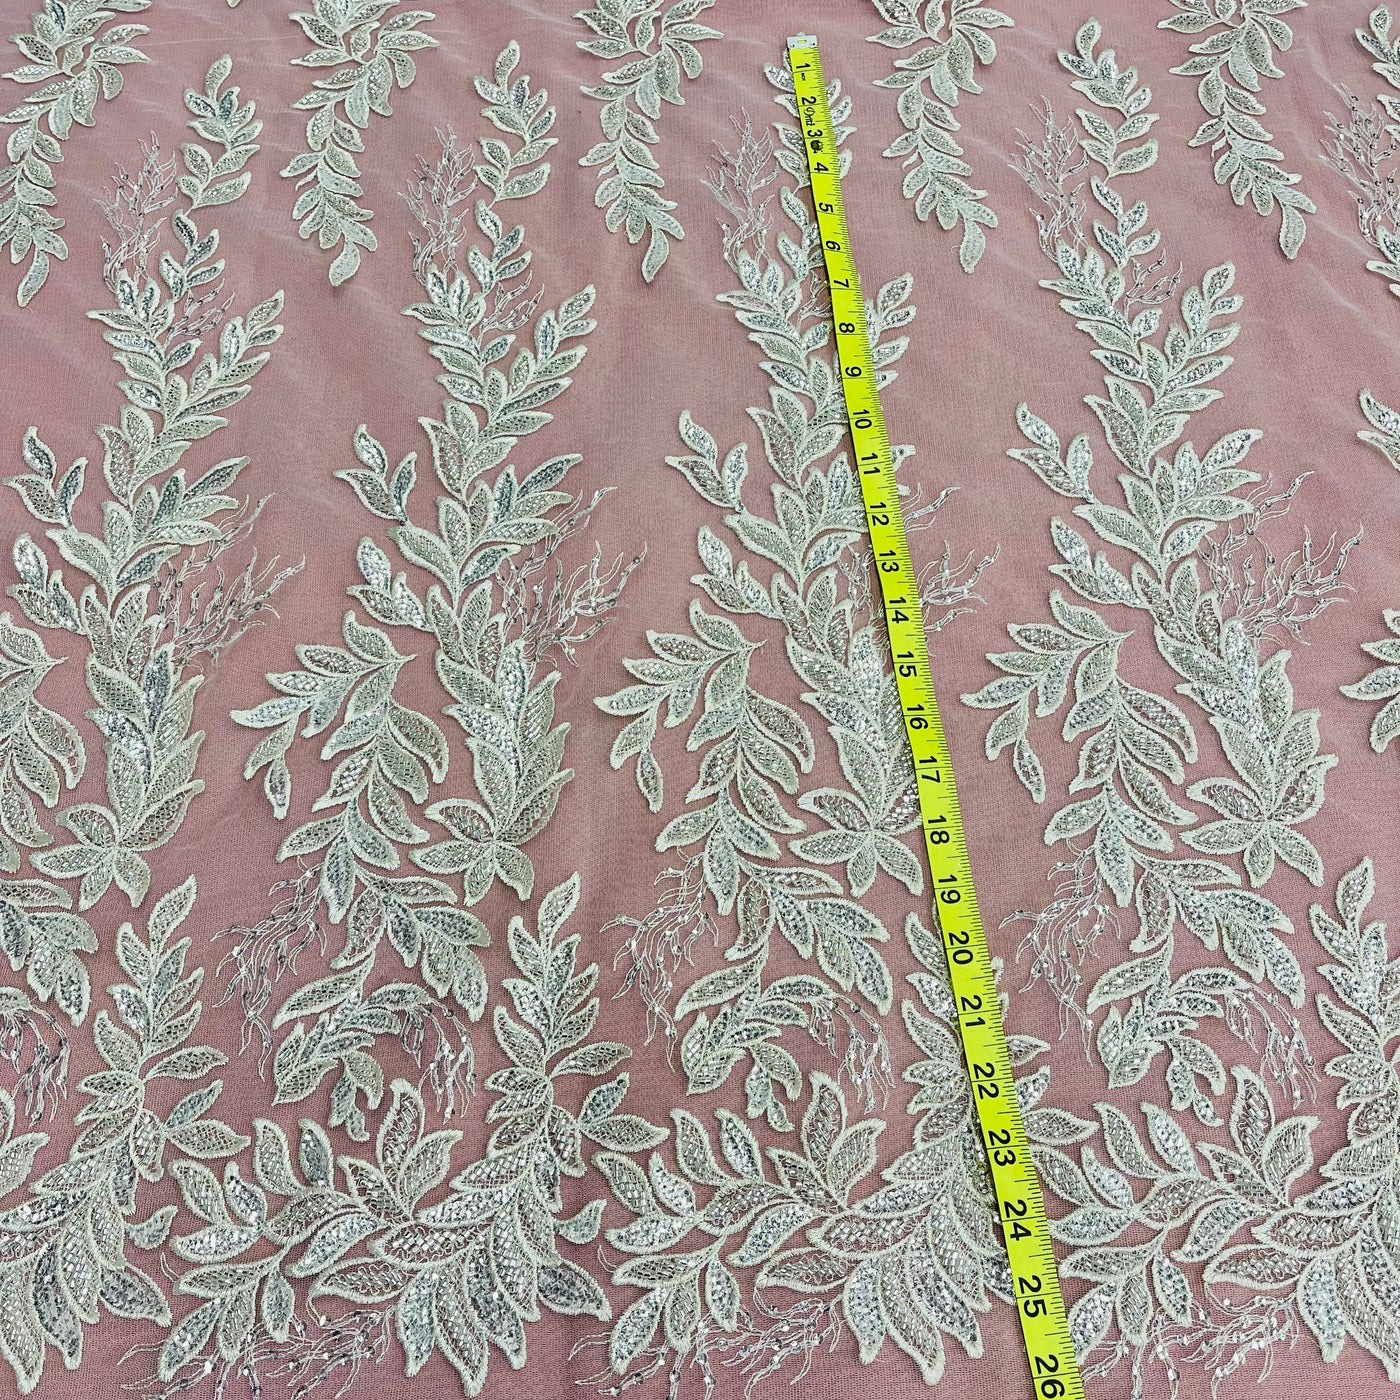 Beaded Lace Fabric Embroidered on 100% Polyester Net Mesh | Lace USA